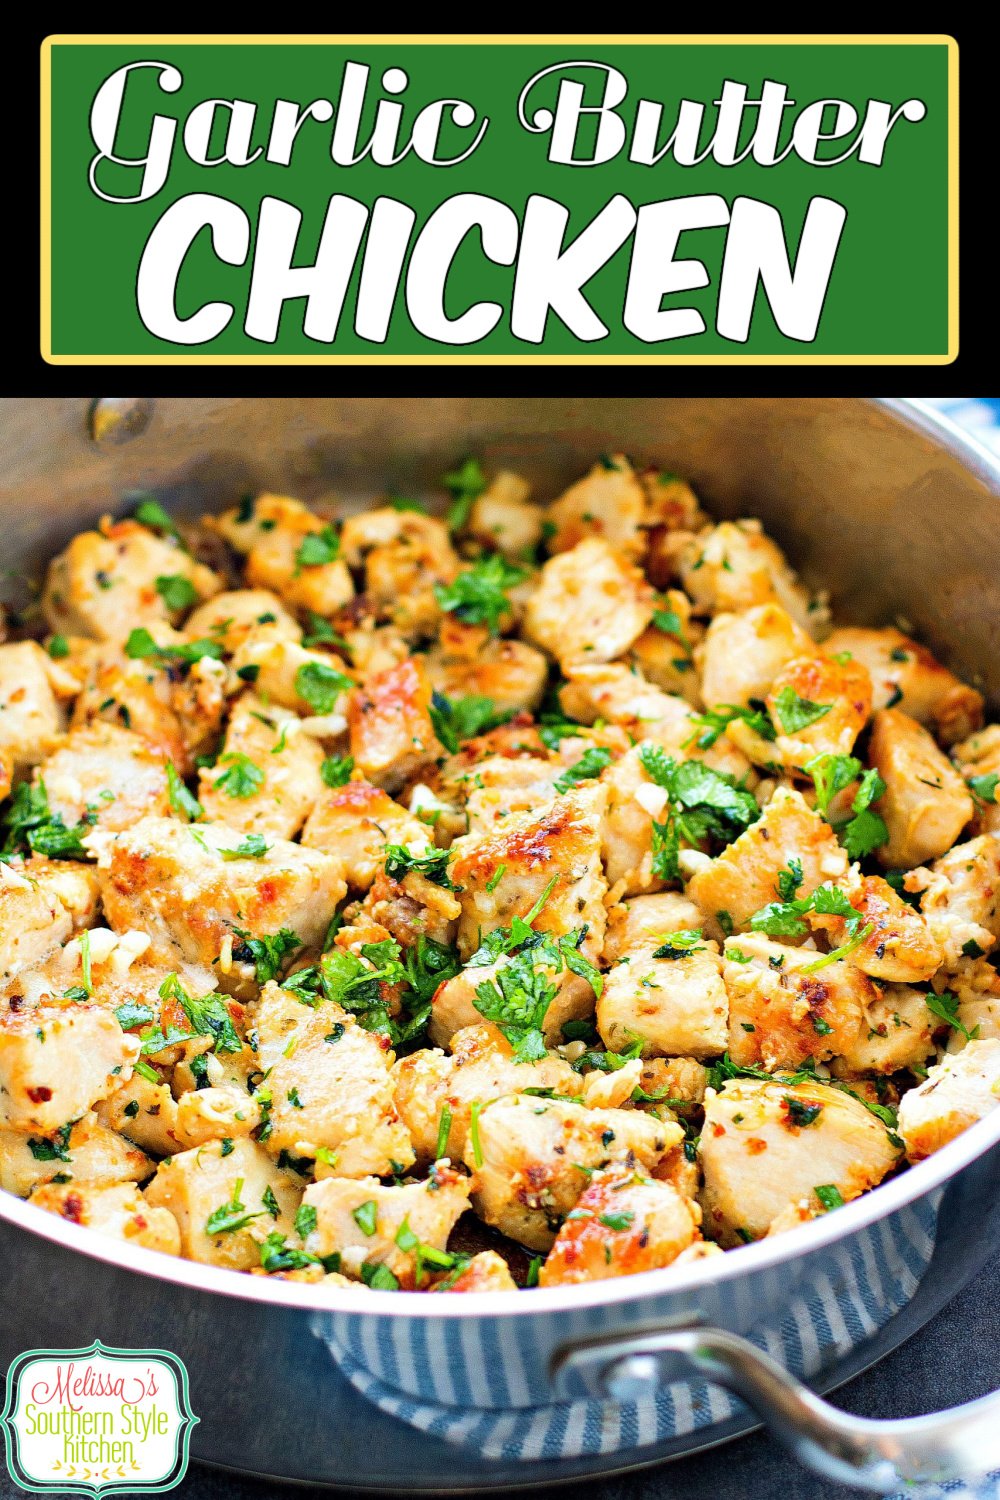 You can have this easy Garlic Butter Chicken on the table in no time flat #garlicbutterchicken #easychickenrecipes #skilletchickenrecipes #dinnerideas #dinnerrecipes #chickenbreastrecipes #southernfood #southernrecipes #skilletmeals via @melissasssk